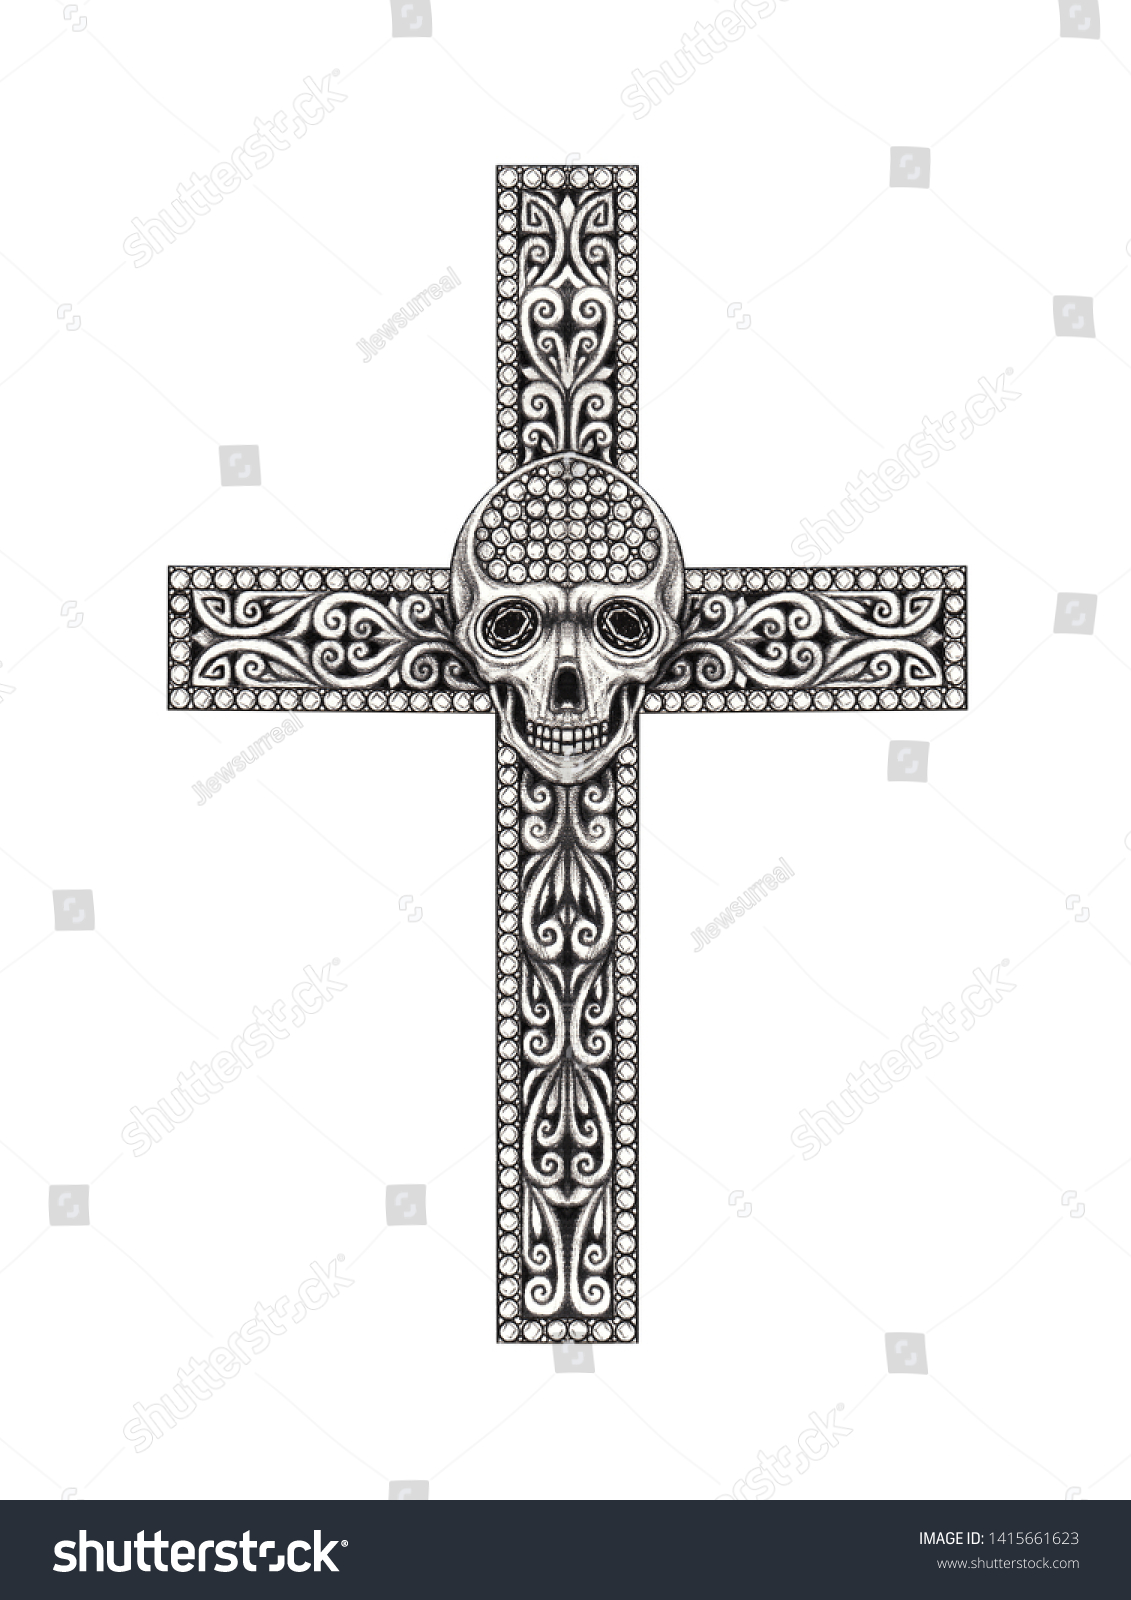 Cross Tattoo In Hand - Amazon Com Cross Tattoo : This contemporary ink placement works well with the simplistic shape of the cross.